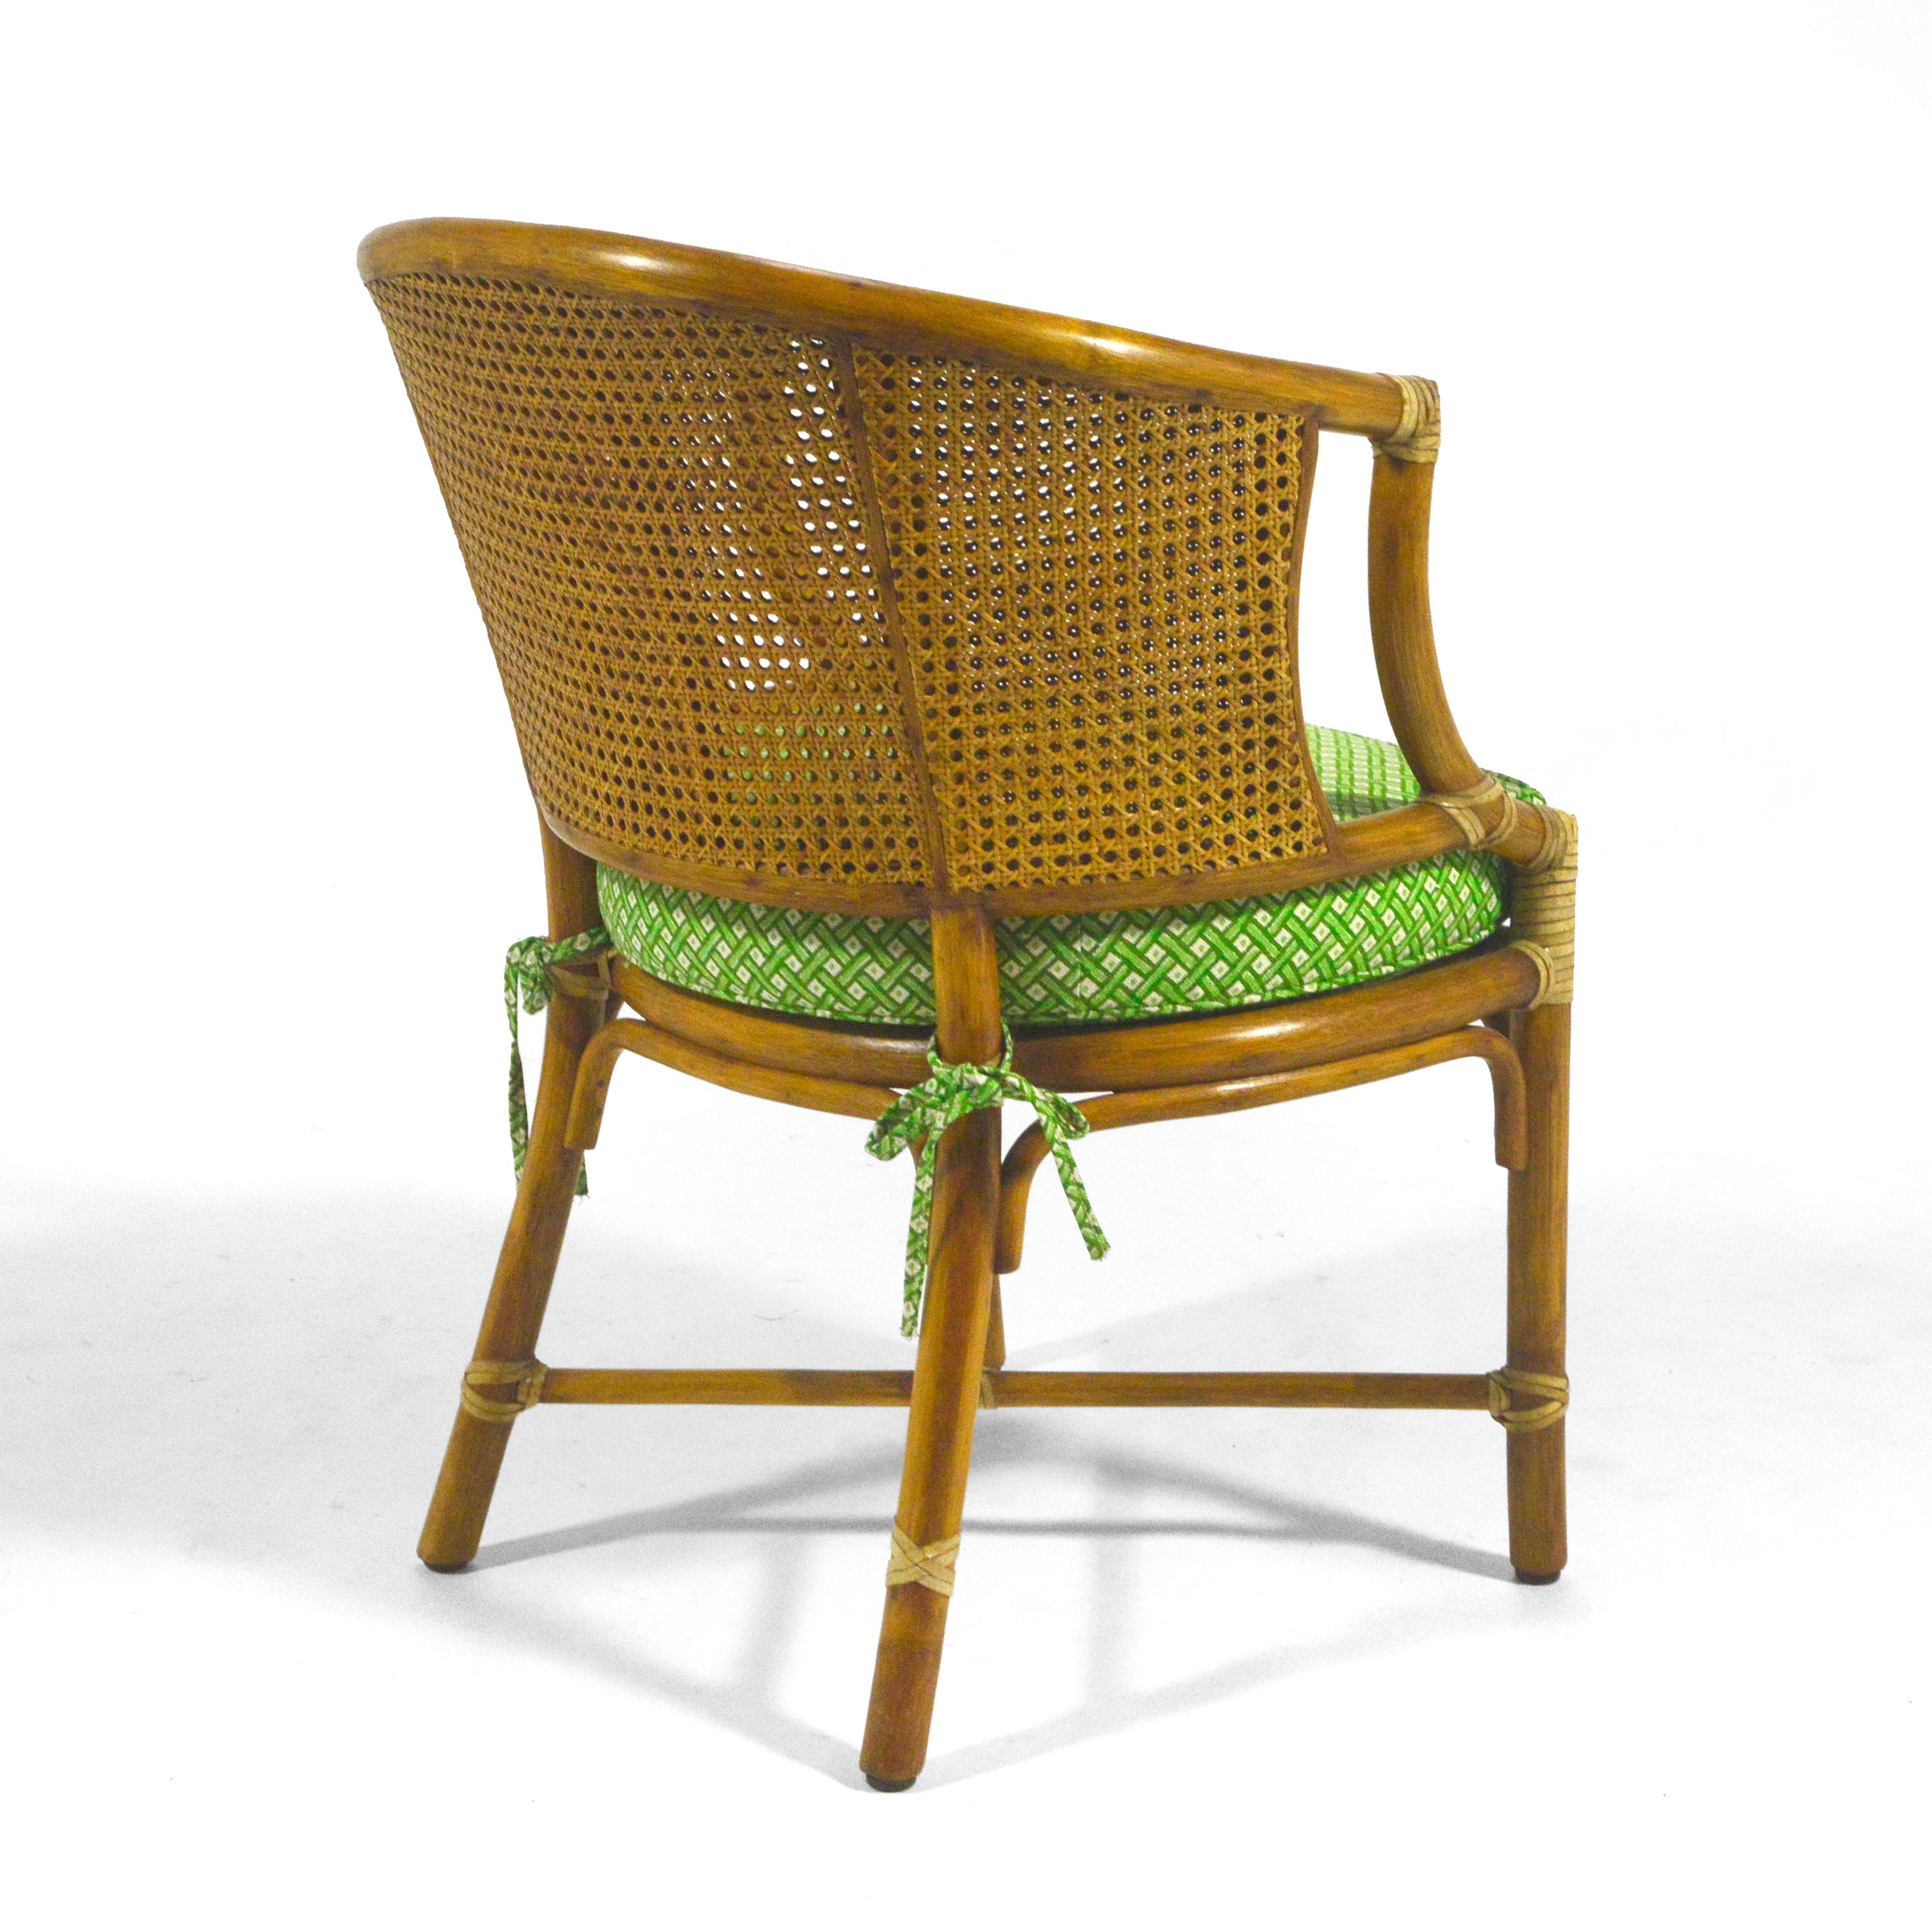 Late 20th Century Elinor McGuire M-86 Rattan & Cane Chair For Sale